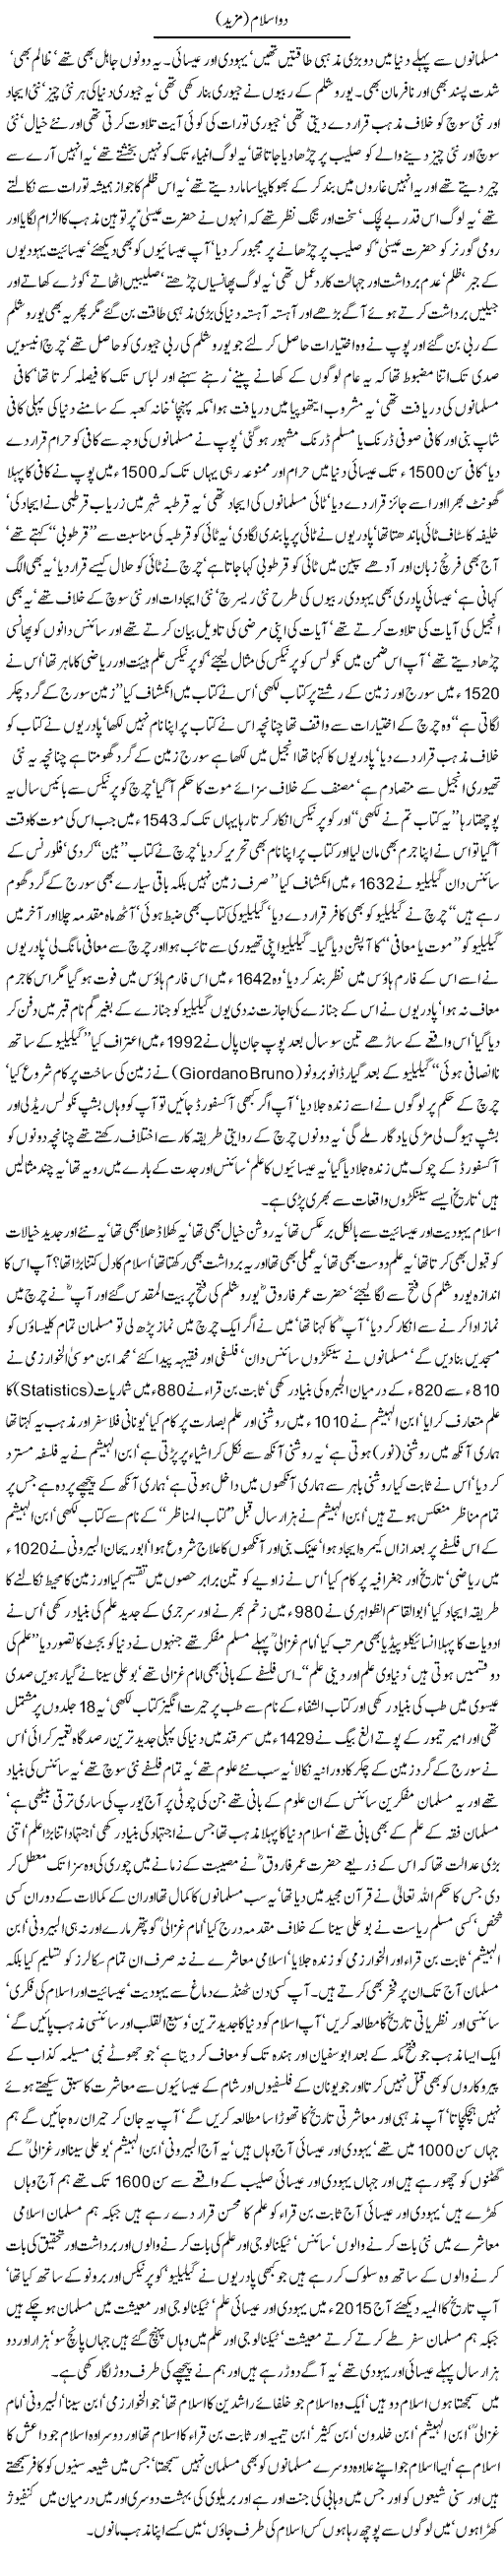 Do islam Part 2 by Javed Chaudhry